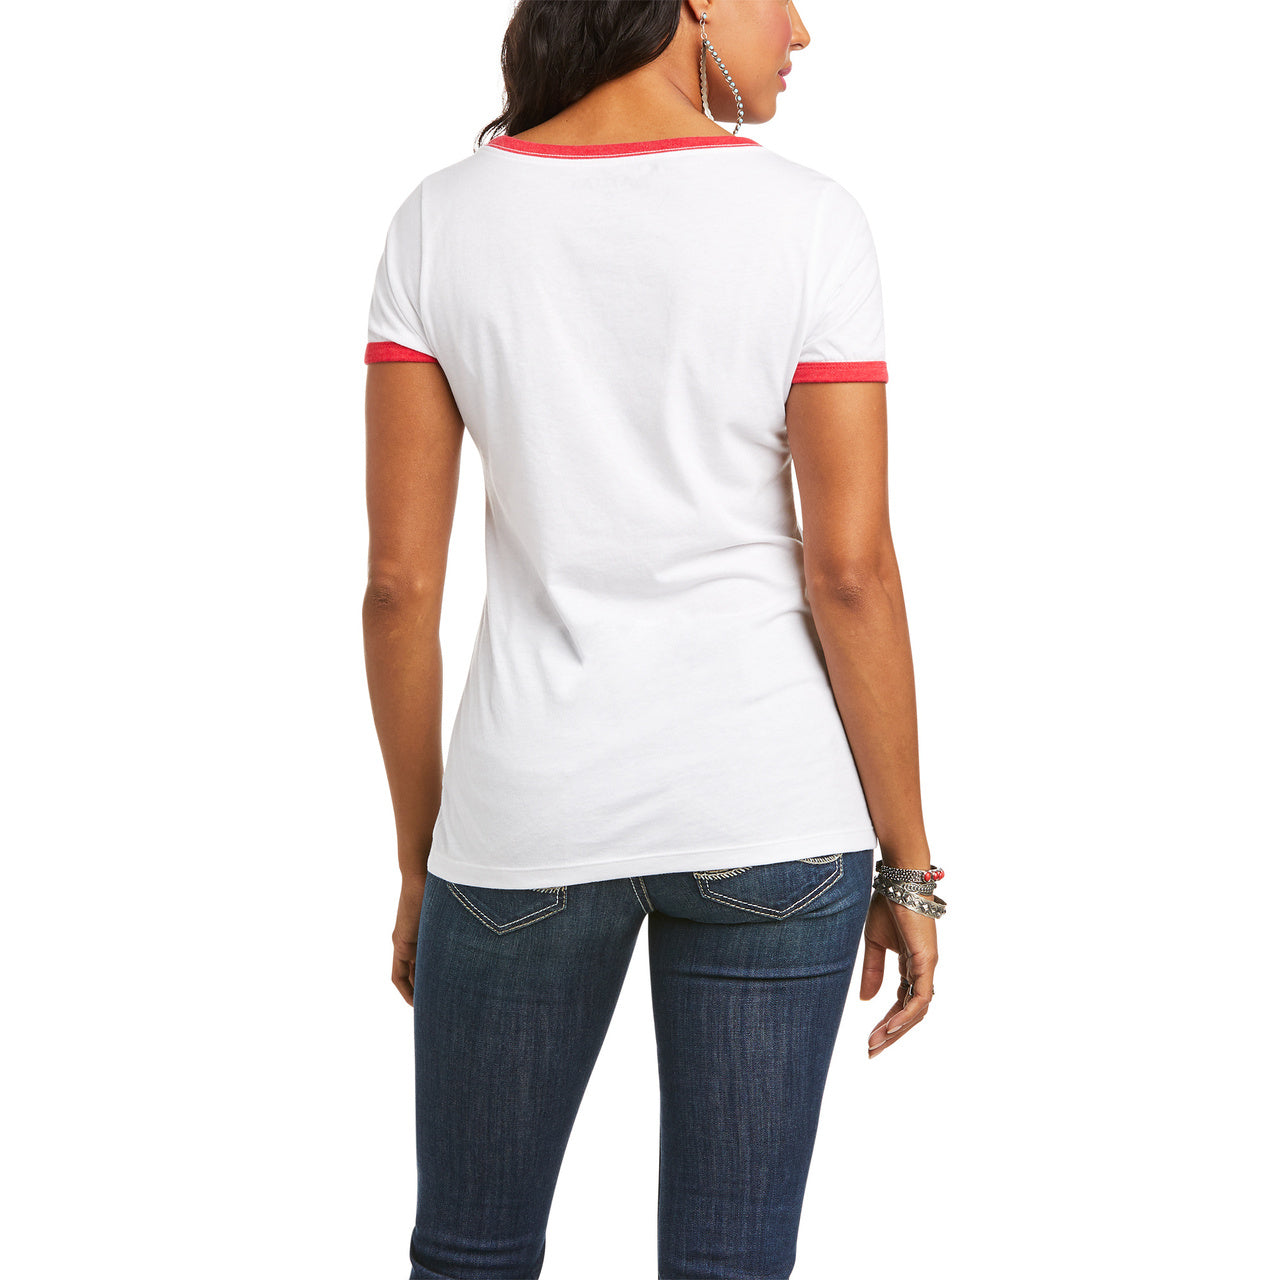 Ariat Women's Blessed White & Red Heather Tee 10036641